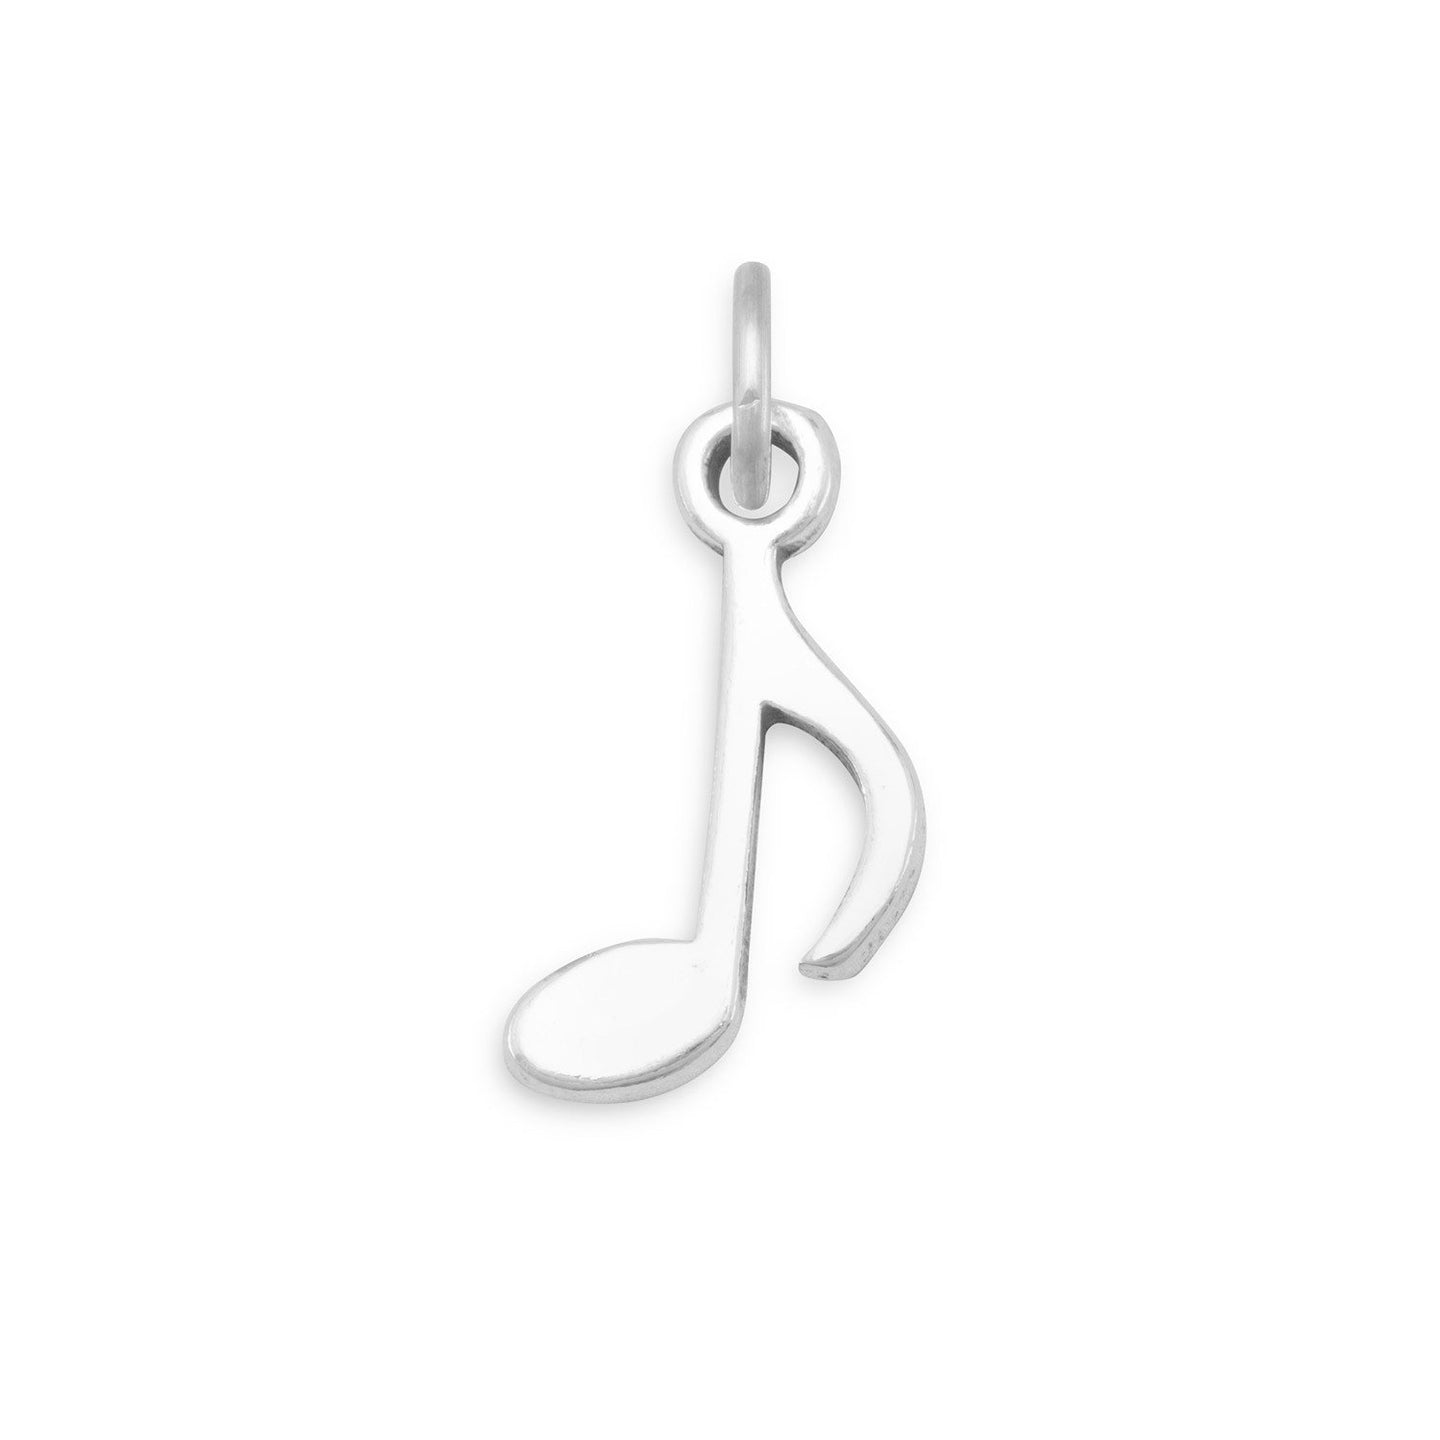 Musical 8th Note Charm - SoMag2